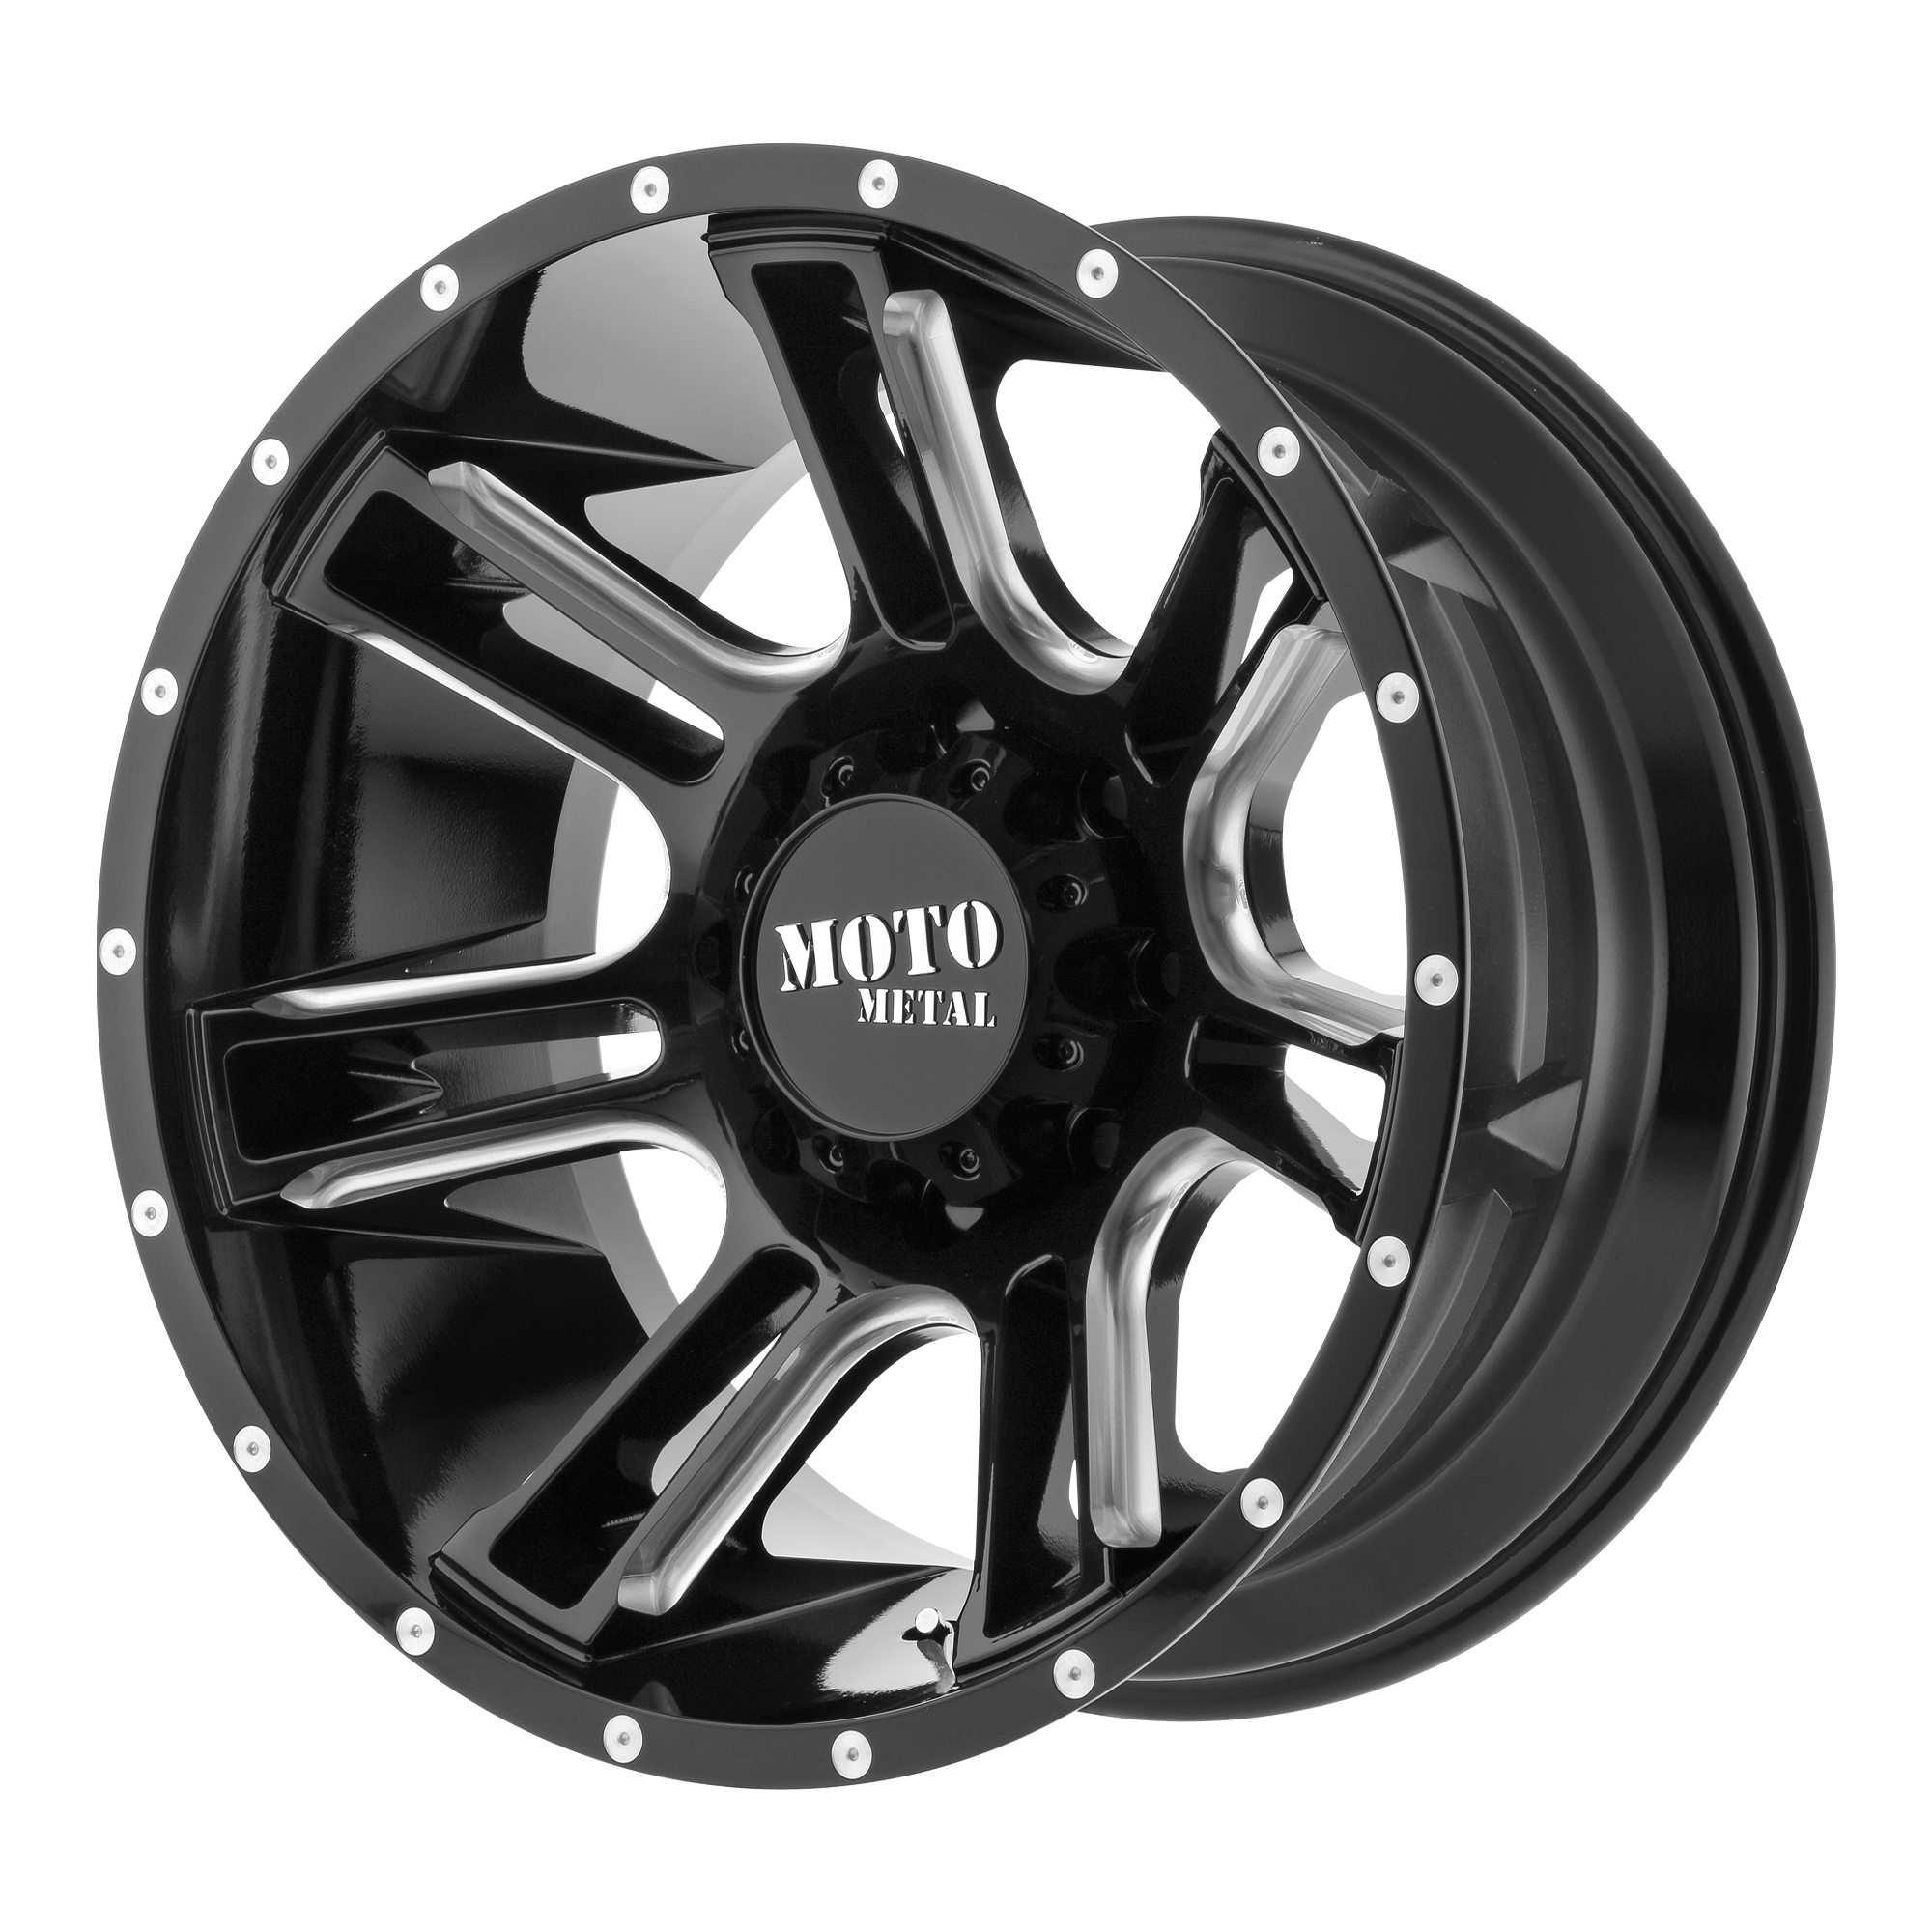 Moto Metal MO982 AMP 20x9 6x135.00 GLOSS BLACK MILLED (0 mm) - Tires and Engine Performance